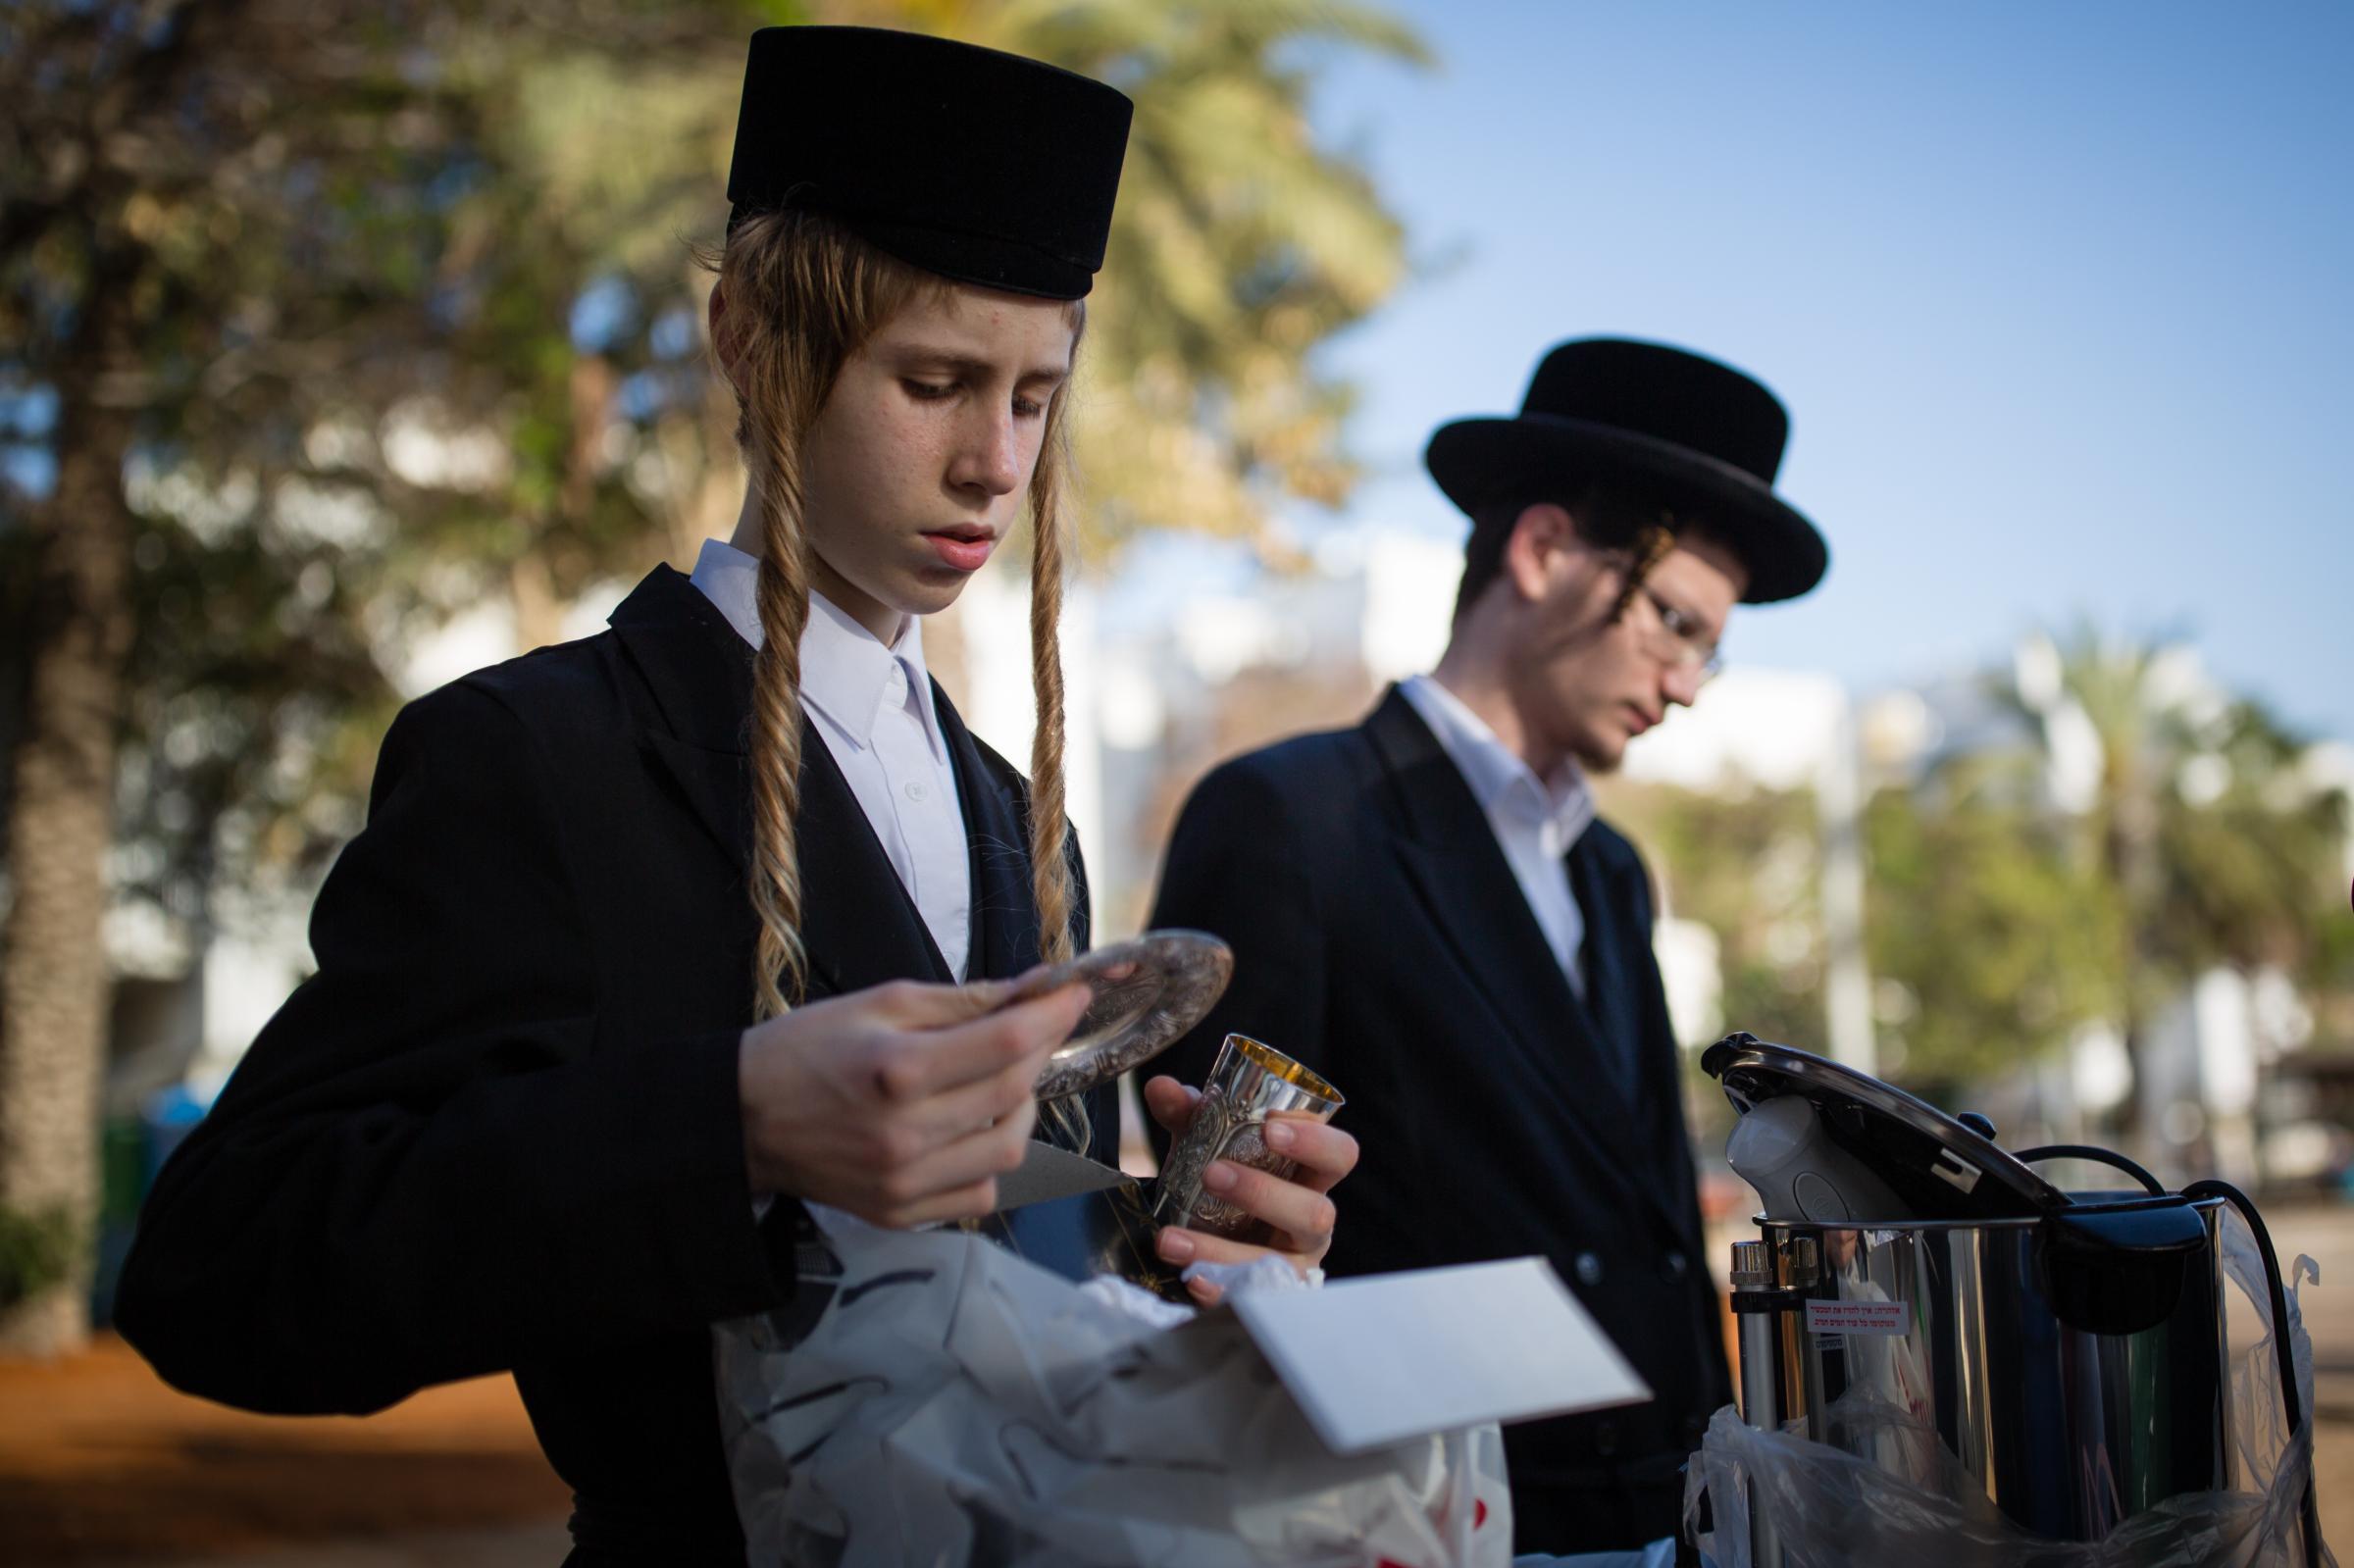 Ultra-Orthodox Community - An ultra-Orthodox Jewish inspects cutlery before dipping...